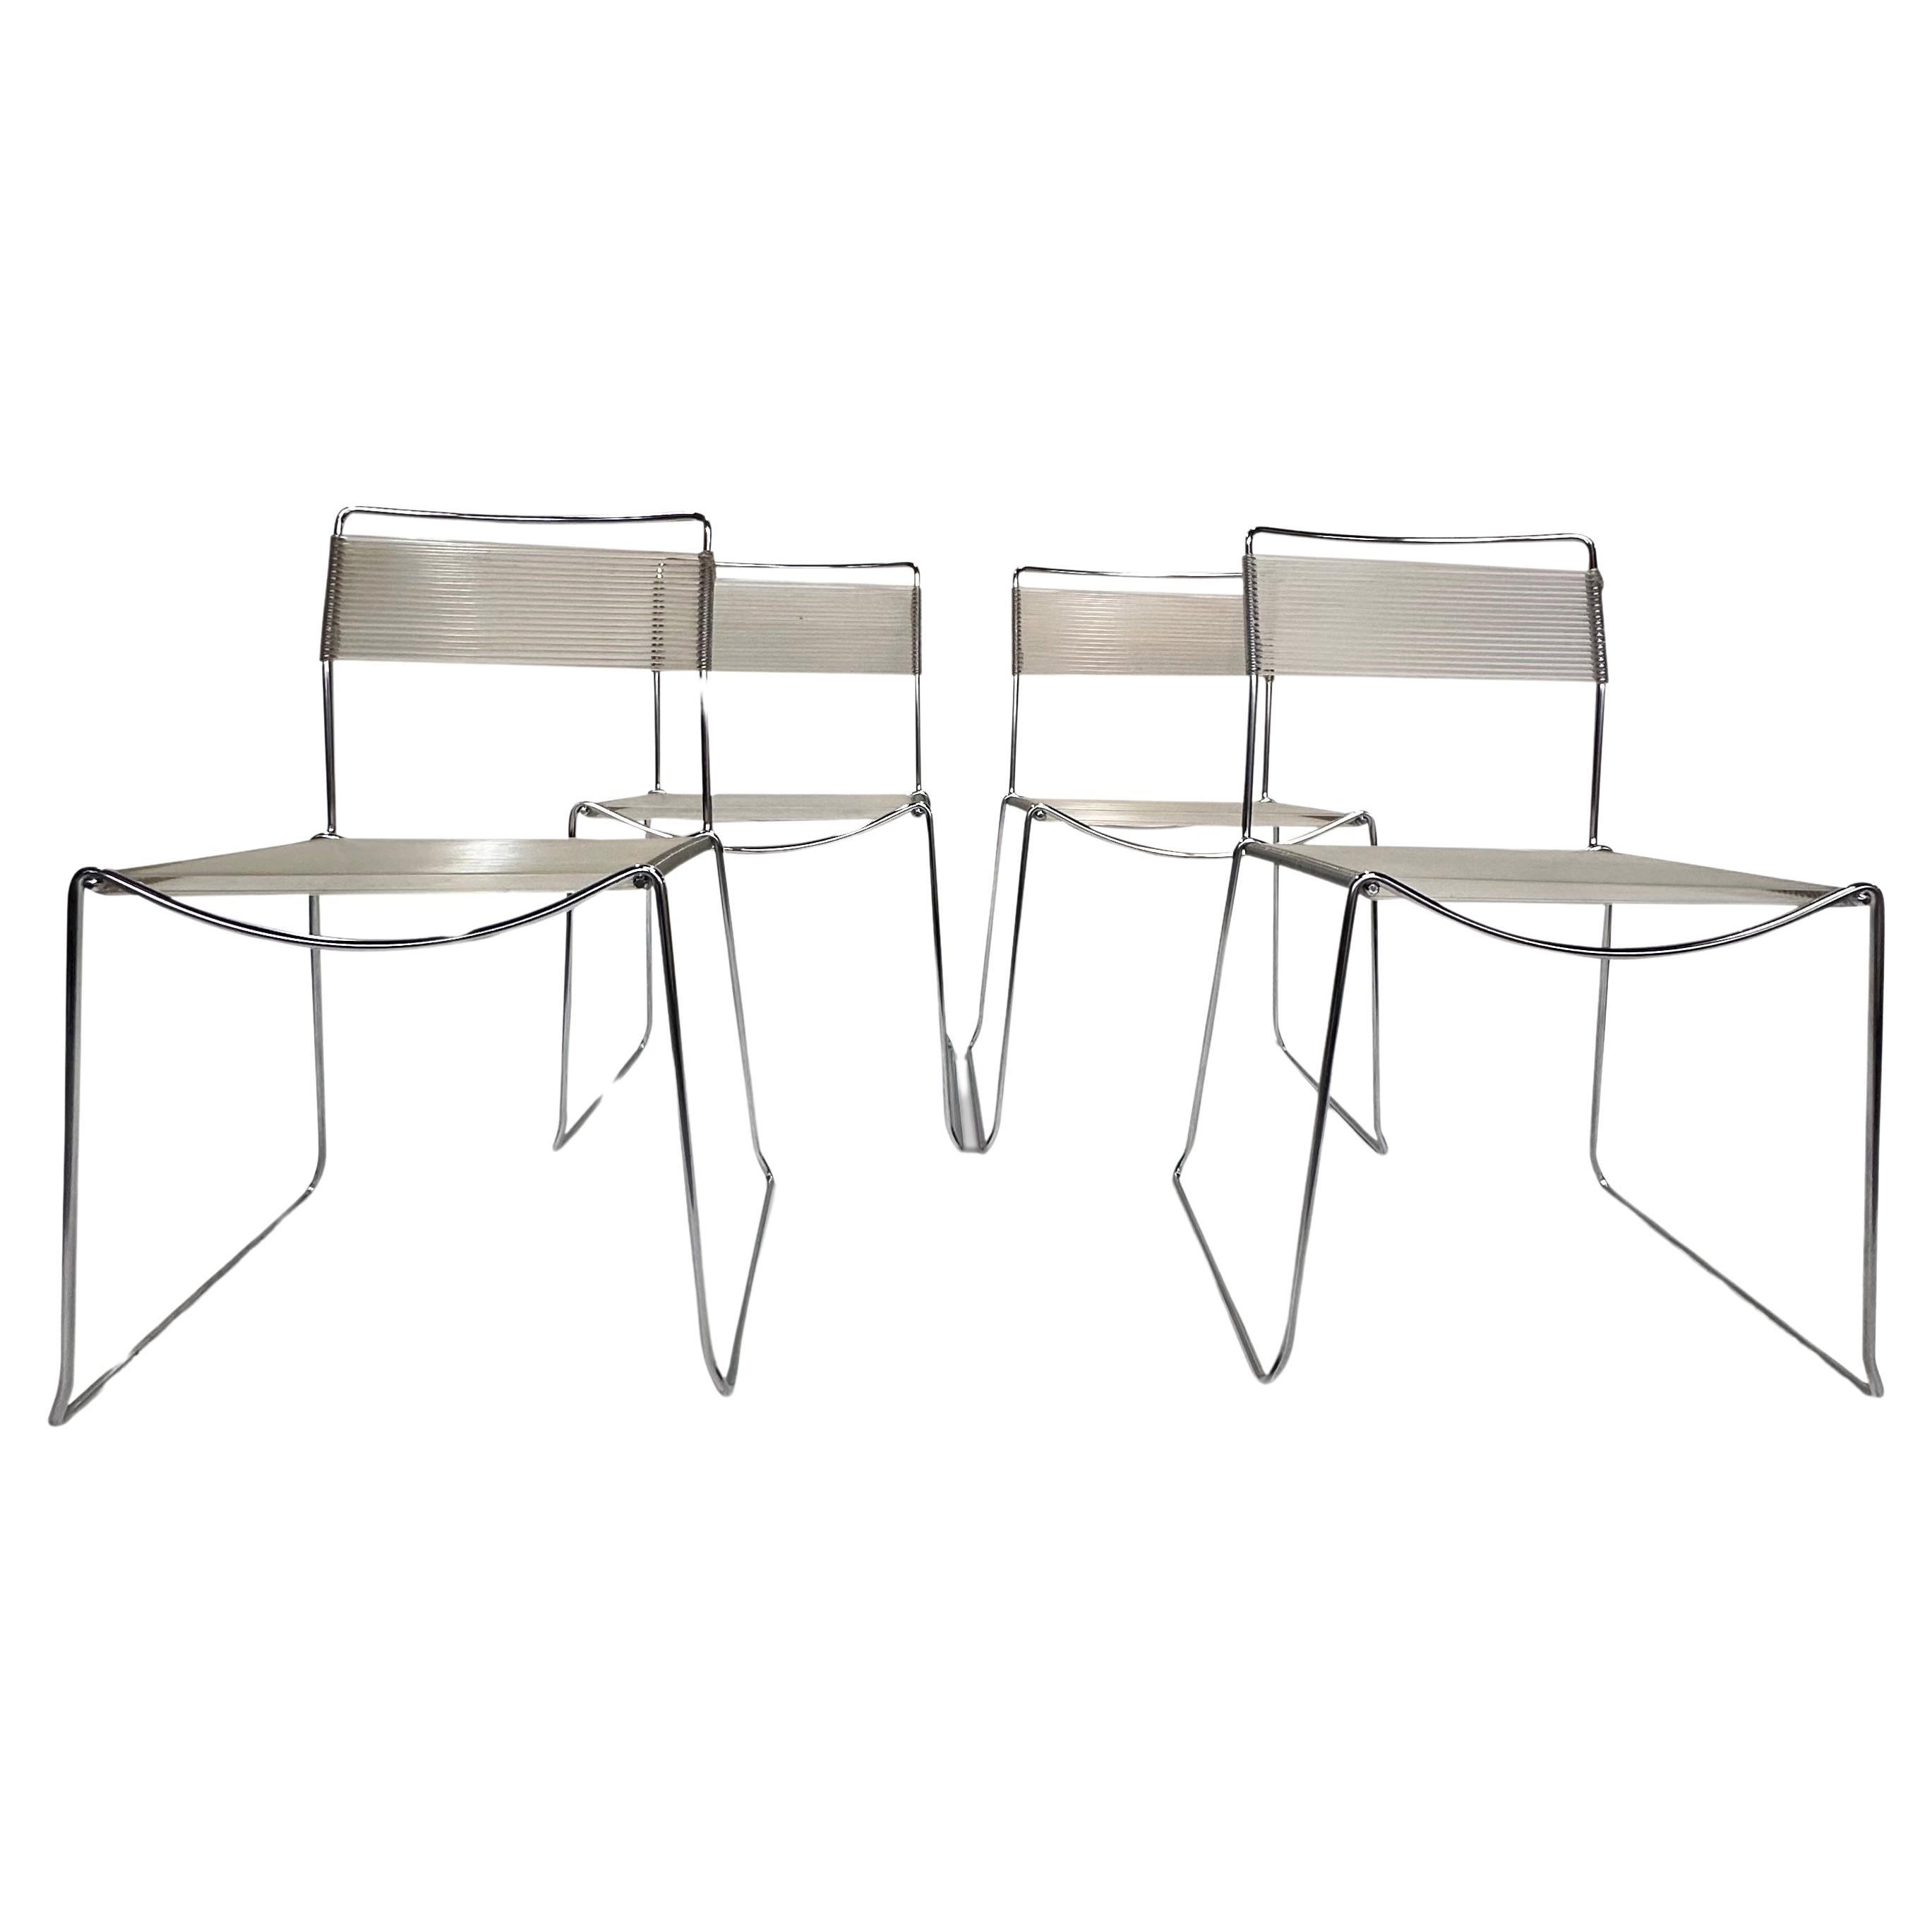 These beautiful Spaghetti chairs were designed by Giandomenico Belotti for Alias ​​in Italy in the 1980s. It has chrome-plated steel frames and clear straps. All PVC tapes are not yet torn or worn. The chair is stackable.